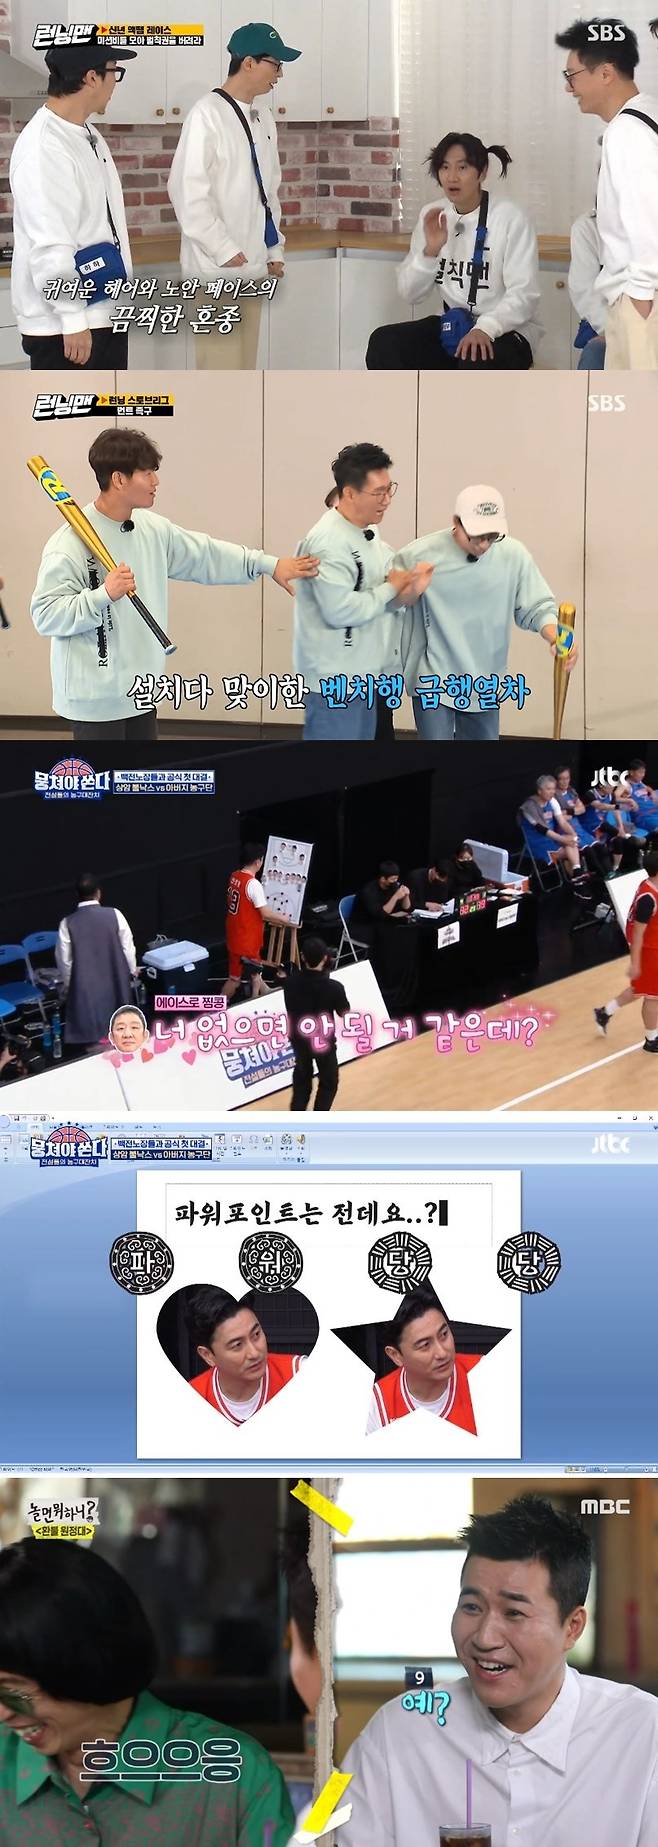 The subtitles power, which adds entertainment to entertainment more entertainment, is emerging as an important factor in entertainment.Infinite Challenge is one of the most representative entertainments that have best utilized subtitles in the past.Kim Tae-ho table courtier subtitles, which gives pins or horses to martial arts members, caused the illusion of Tikitaka with members.In addition, the skeleton subtitles and the sound effect that appear at the moment when the member seems to have hit the back of the head are also a signal of a loud voice.The court-shaped subtitles and skeleton effect sound were loved by many as the Infinite Challenge signature with the mascot dancer.Nowadays, as YouTube and clip videos have developed, Web browsertainment is as popular as broadcasting.Unlike broadcasting, the charm of the breathtaking Web brochurerecentertainment was popular with the younger generation.From the re-Ment beyond the line of the cast, the relentless editing and directing as well as the sensible subtitles doubled the fun of Web brouserentetainment.Broadcasting entertainment, which has recently been influenced by Web growtherententenment, is also changing along the young trend.Web broadcasting was also the beginning of the production of subtitles using the face of the performer used in many broadcasters.Subtitles production of Web browsertainment, which is not embedded in this framework, has also started to affect broadcasting entertainment.As well as the subtitles mentioned above, the subtitles no longer just explained the situation.Goes to subtitles that highlight the cast Laughter and capture the directors intentions.Adding to this young sensibility reveals the power of subtitles that make entertainment more entertaining.SBS longevity entertainment Running Man recently caught the laughing points in the performer Re-Ment appropriately and changed the subtitles font according to the accent and intention.In addition, they amplify laughter by subtitles to fit the Re-Ment or situation, especially by mixing new generation terms and community memes with subtitles to suit young emotions.Ill Shoot You in a Bunch, which resonated with a laughing bomb after the first broadcast, was also acclaimed as a subtitles to highlight the Hur Jae character, who was enchanted by the skills of basketball legends.When director Hur Jae laughs at the play, the Laughter subtitles from the nose comes to the unique fun of visualizing the sound.Now, subtitles in entertainment have become so important that we can not talk about it.The cast members supplement the missing part with subtitles, and make the situation more fun.Of course, it is misunderstood because of the unnecessary subtitles, and the subtitles that have transferred the re-Ment and the emotions that the performers have not done.But it is undeniable that subtitles are a vital component of the program.Kim Young-hee PD, who introduced the first subtitles to Korea entertainment, said in the broadcast, It is subtitles that can give a great liveliness to the whole screen.So I thought I should make up these subtitles. Subtitles, which have been merely delivering information, are changing in line with the trend. As such, younger subtitles are attracting viewers favor.